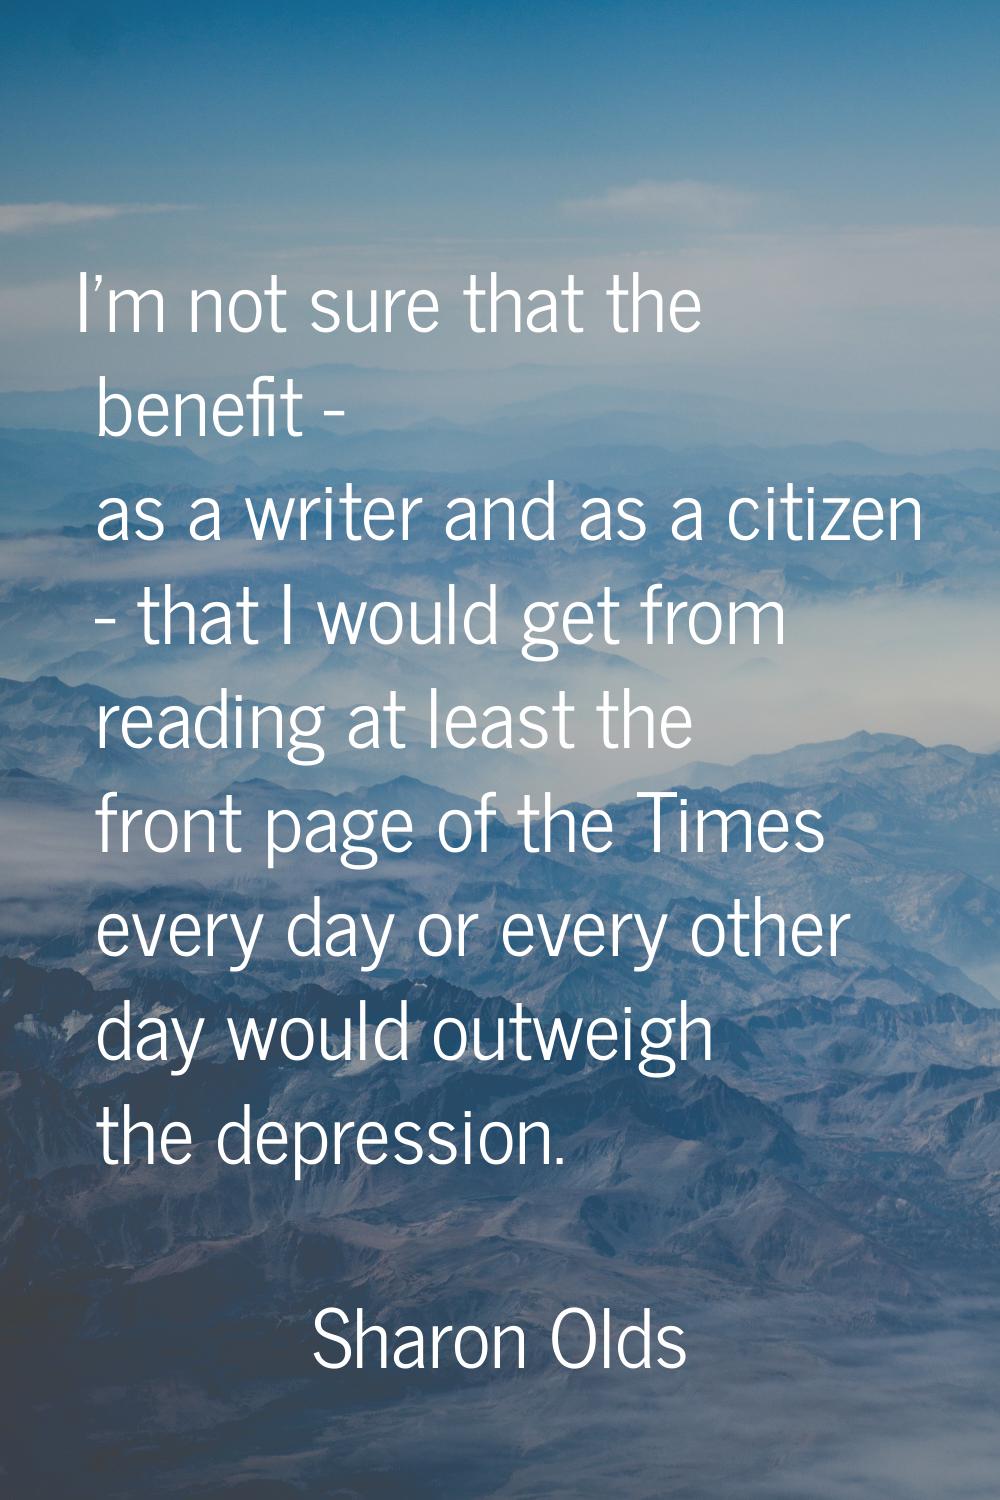 I'm not sure that the benefit - as a writer and as a citizen - that I would get from reading at lea